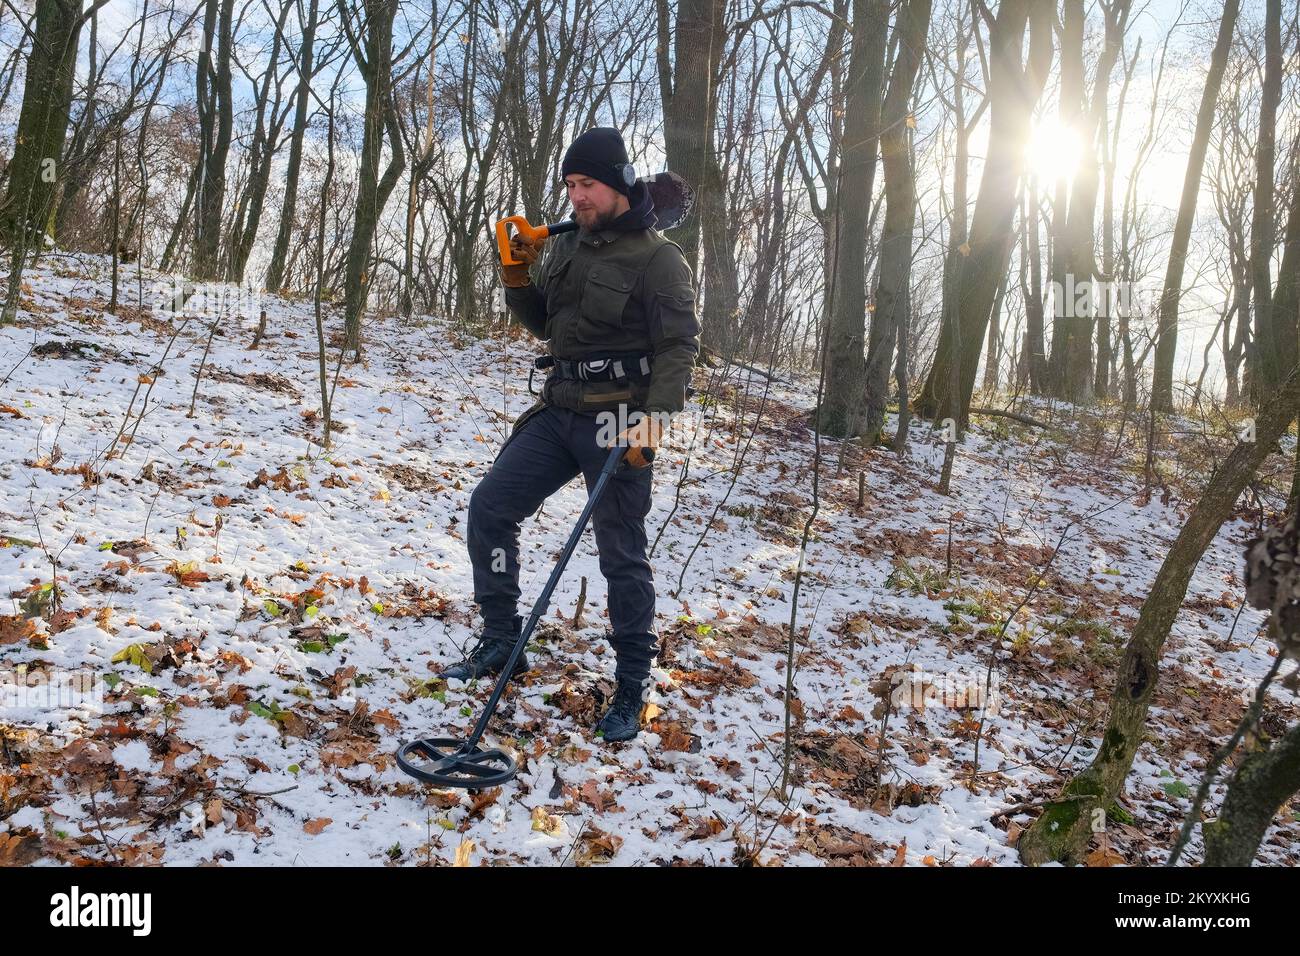 Man with metal detector and shovel in snowy forest Stock Photo